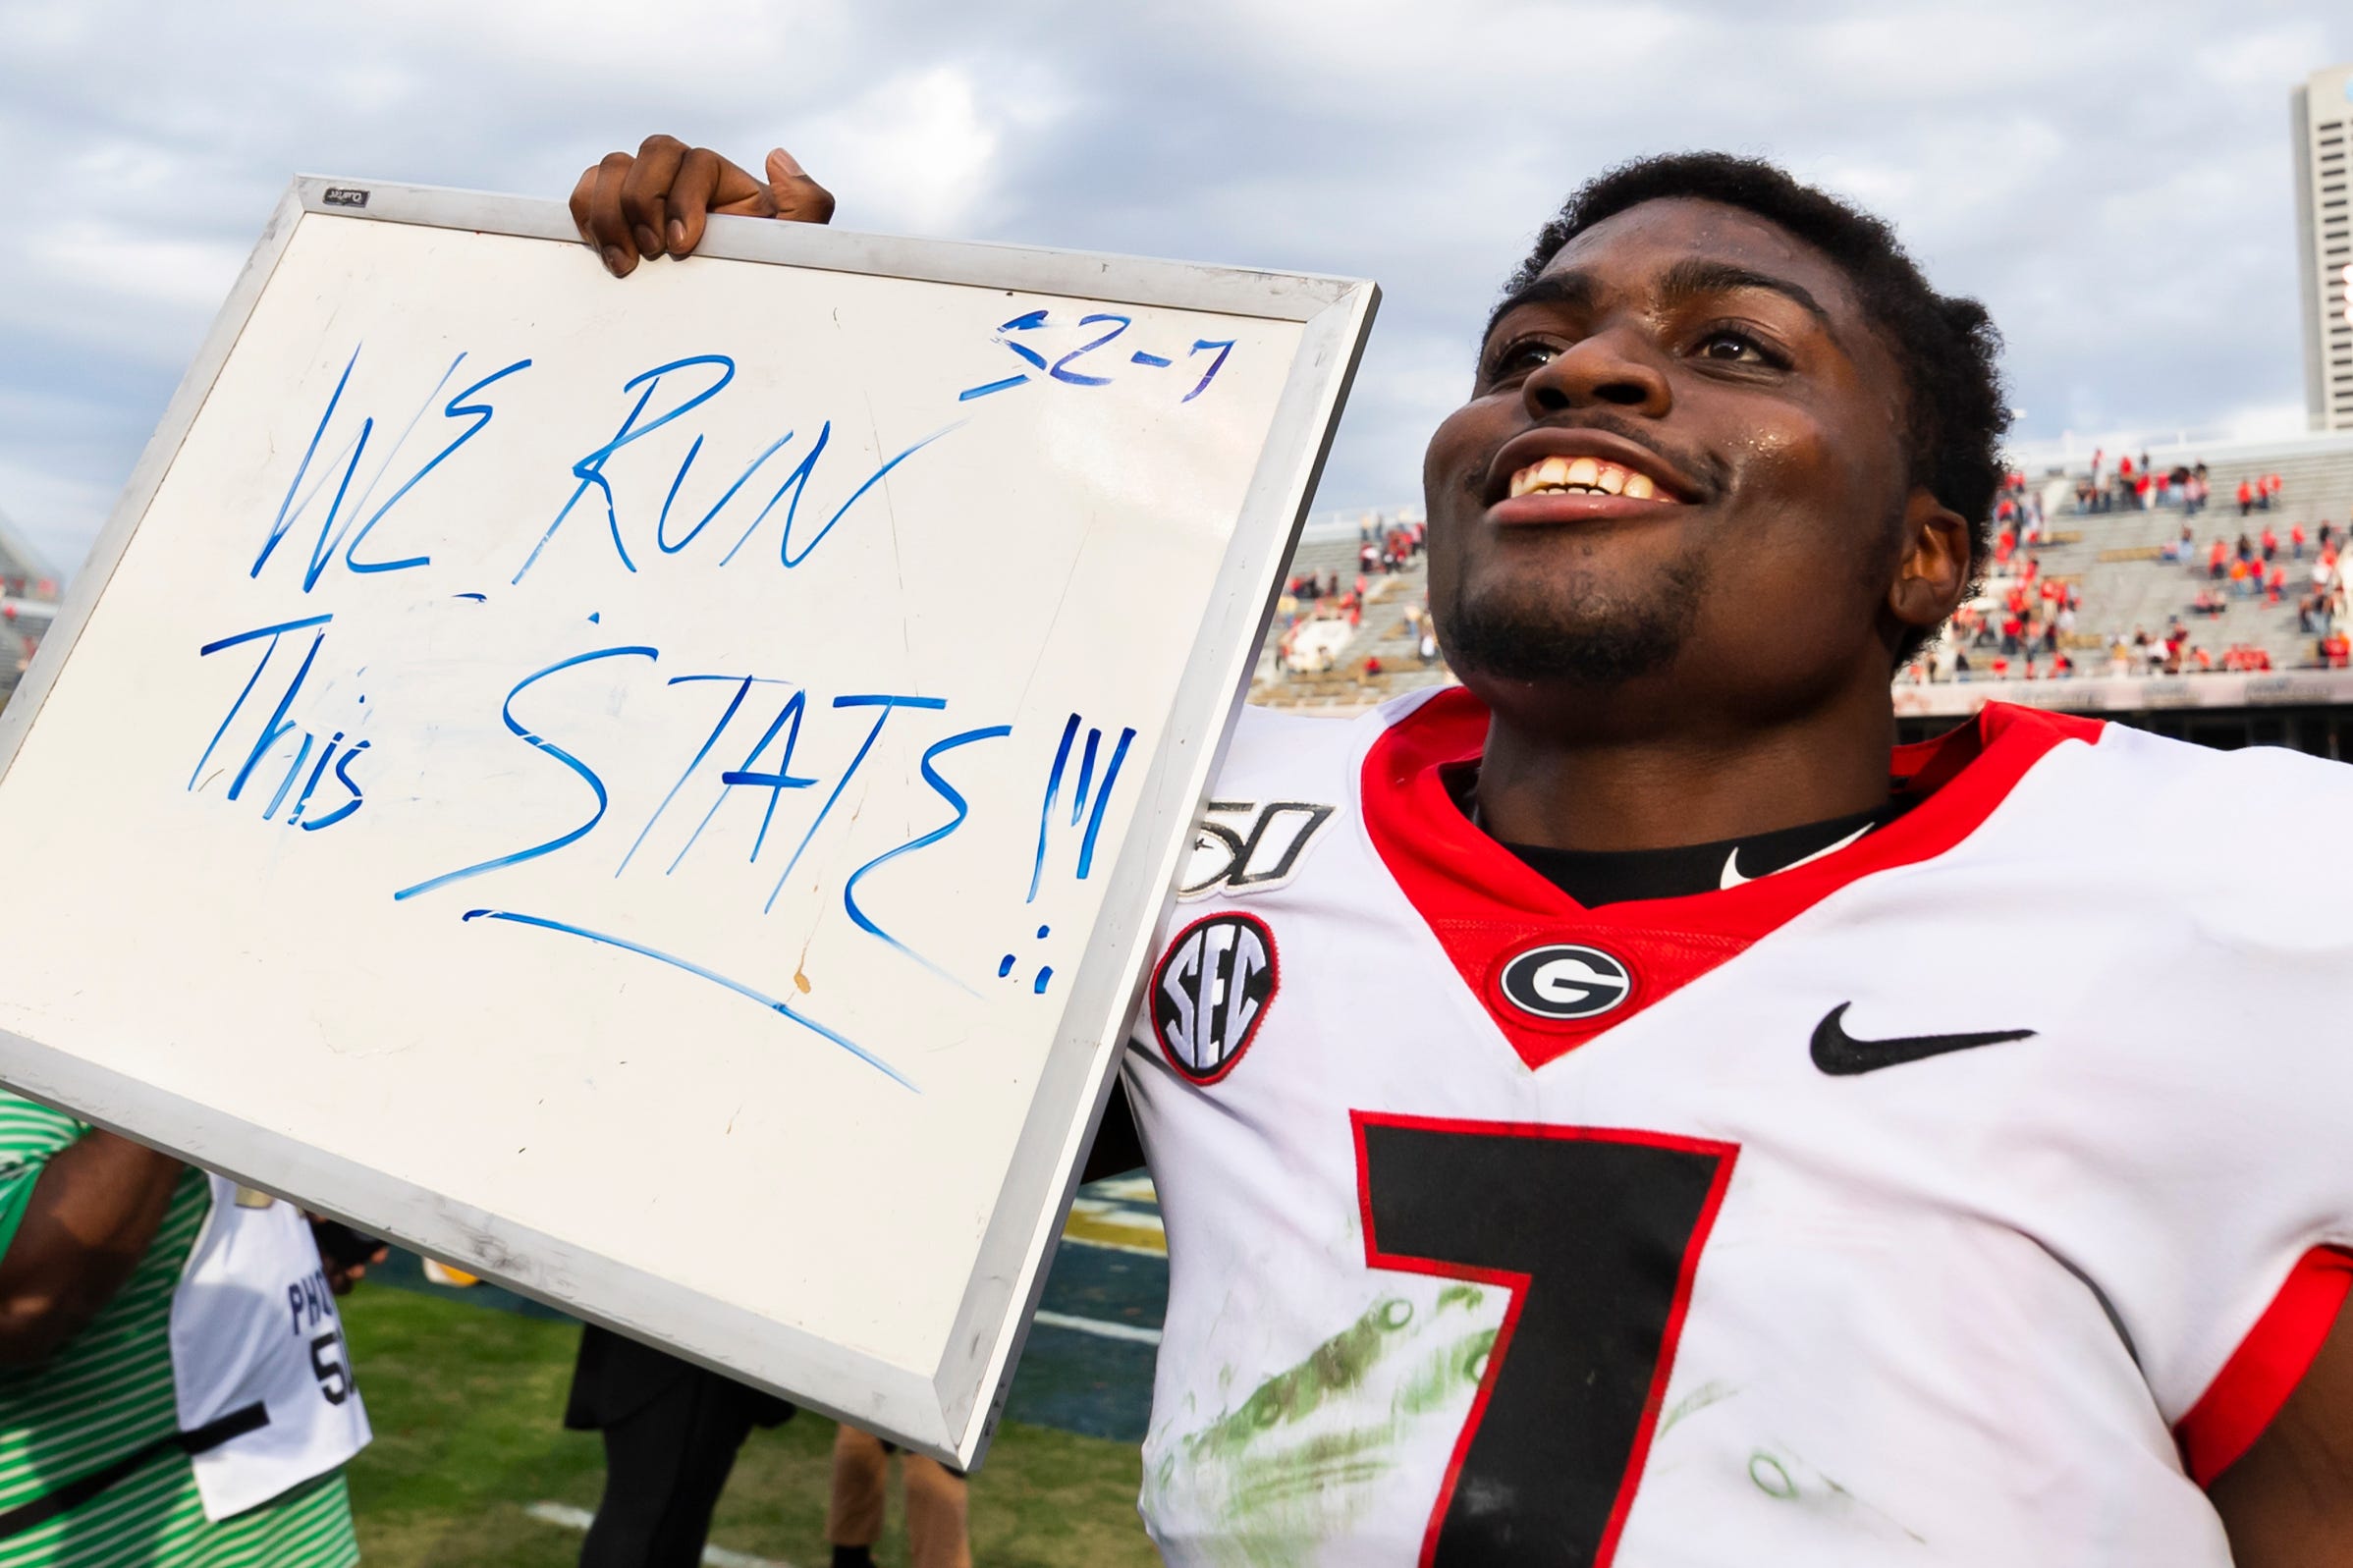 Georgia running back D'Andre Swift holds up a message for fans as he leaves the field after a win over Georgia Tech in 2019.